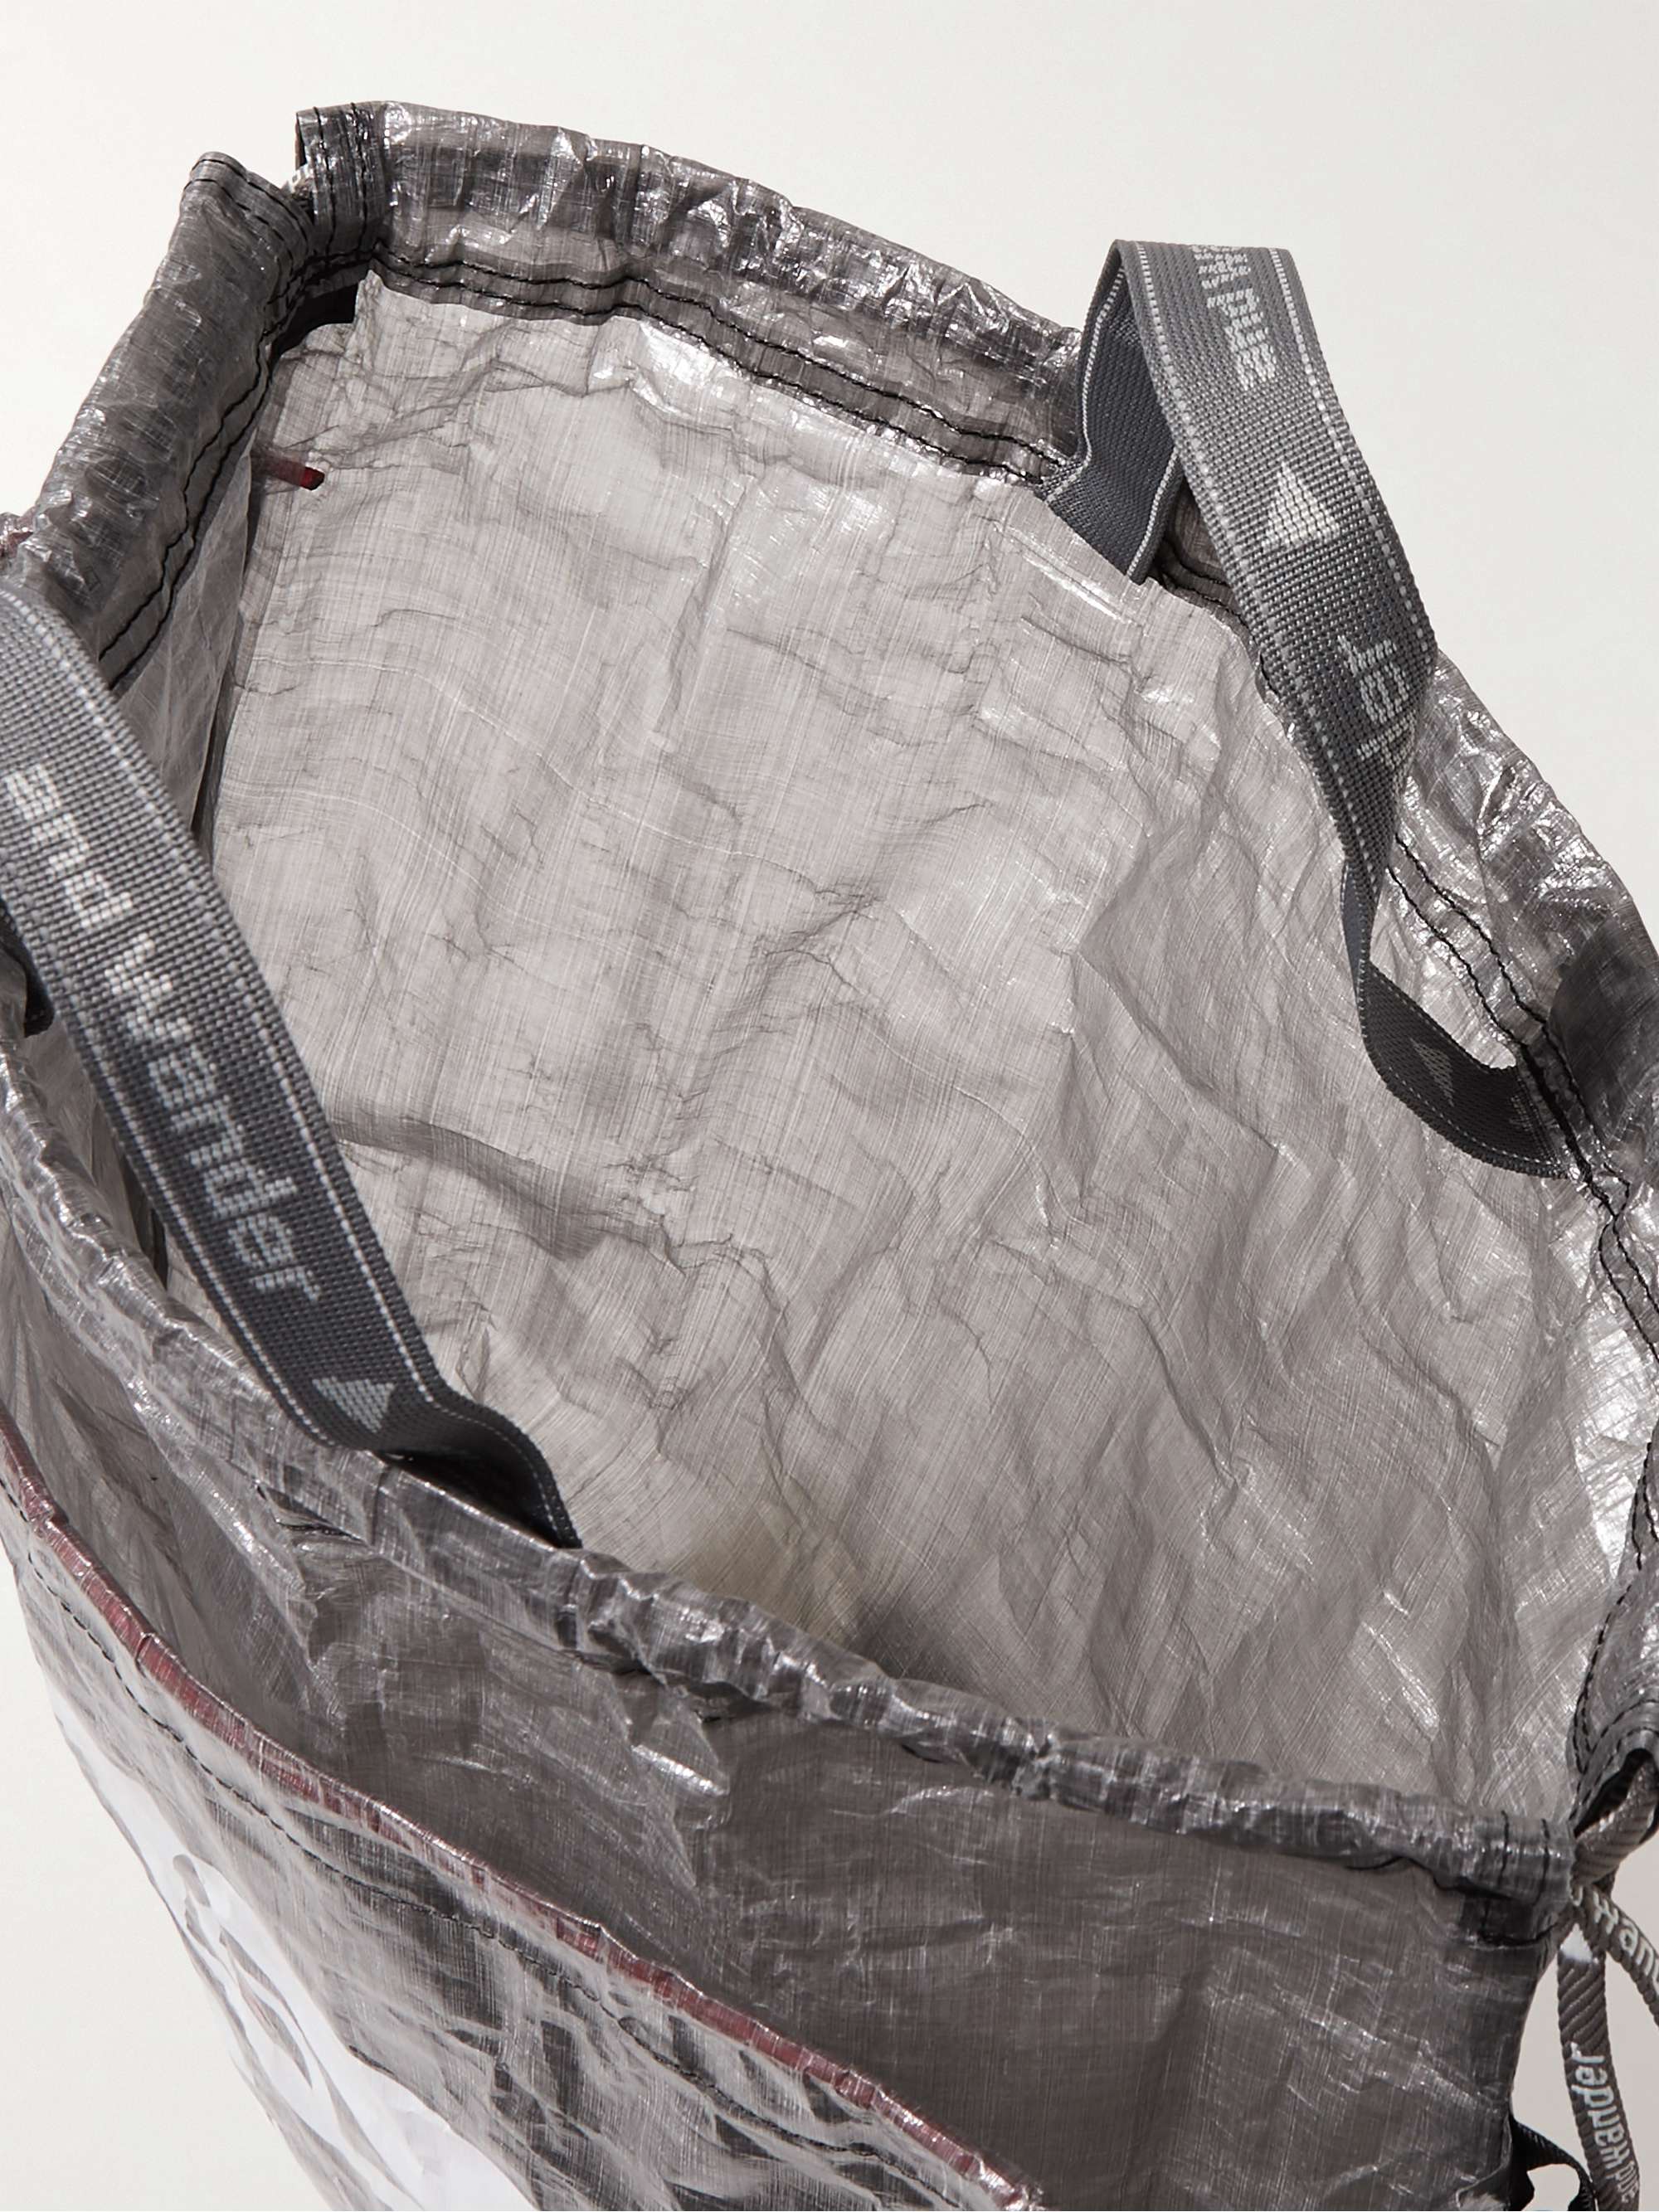 DISTRICT VISION + And Wander Coated-Dyneema Backpack